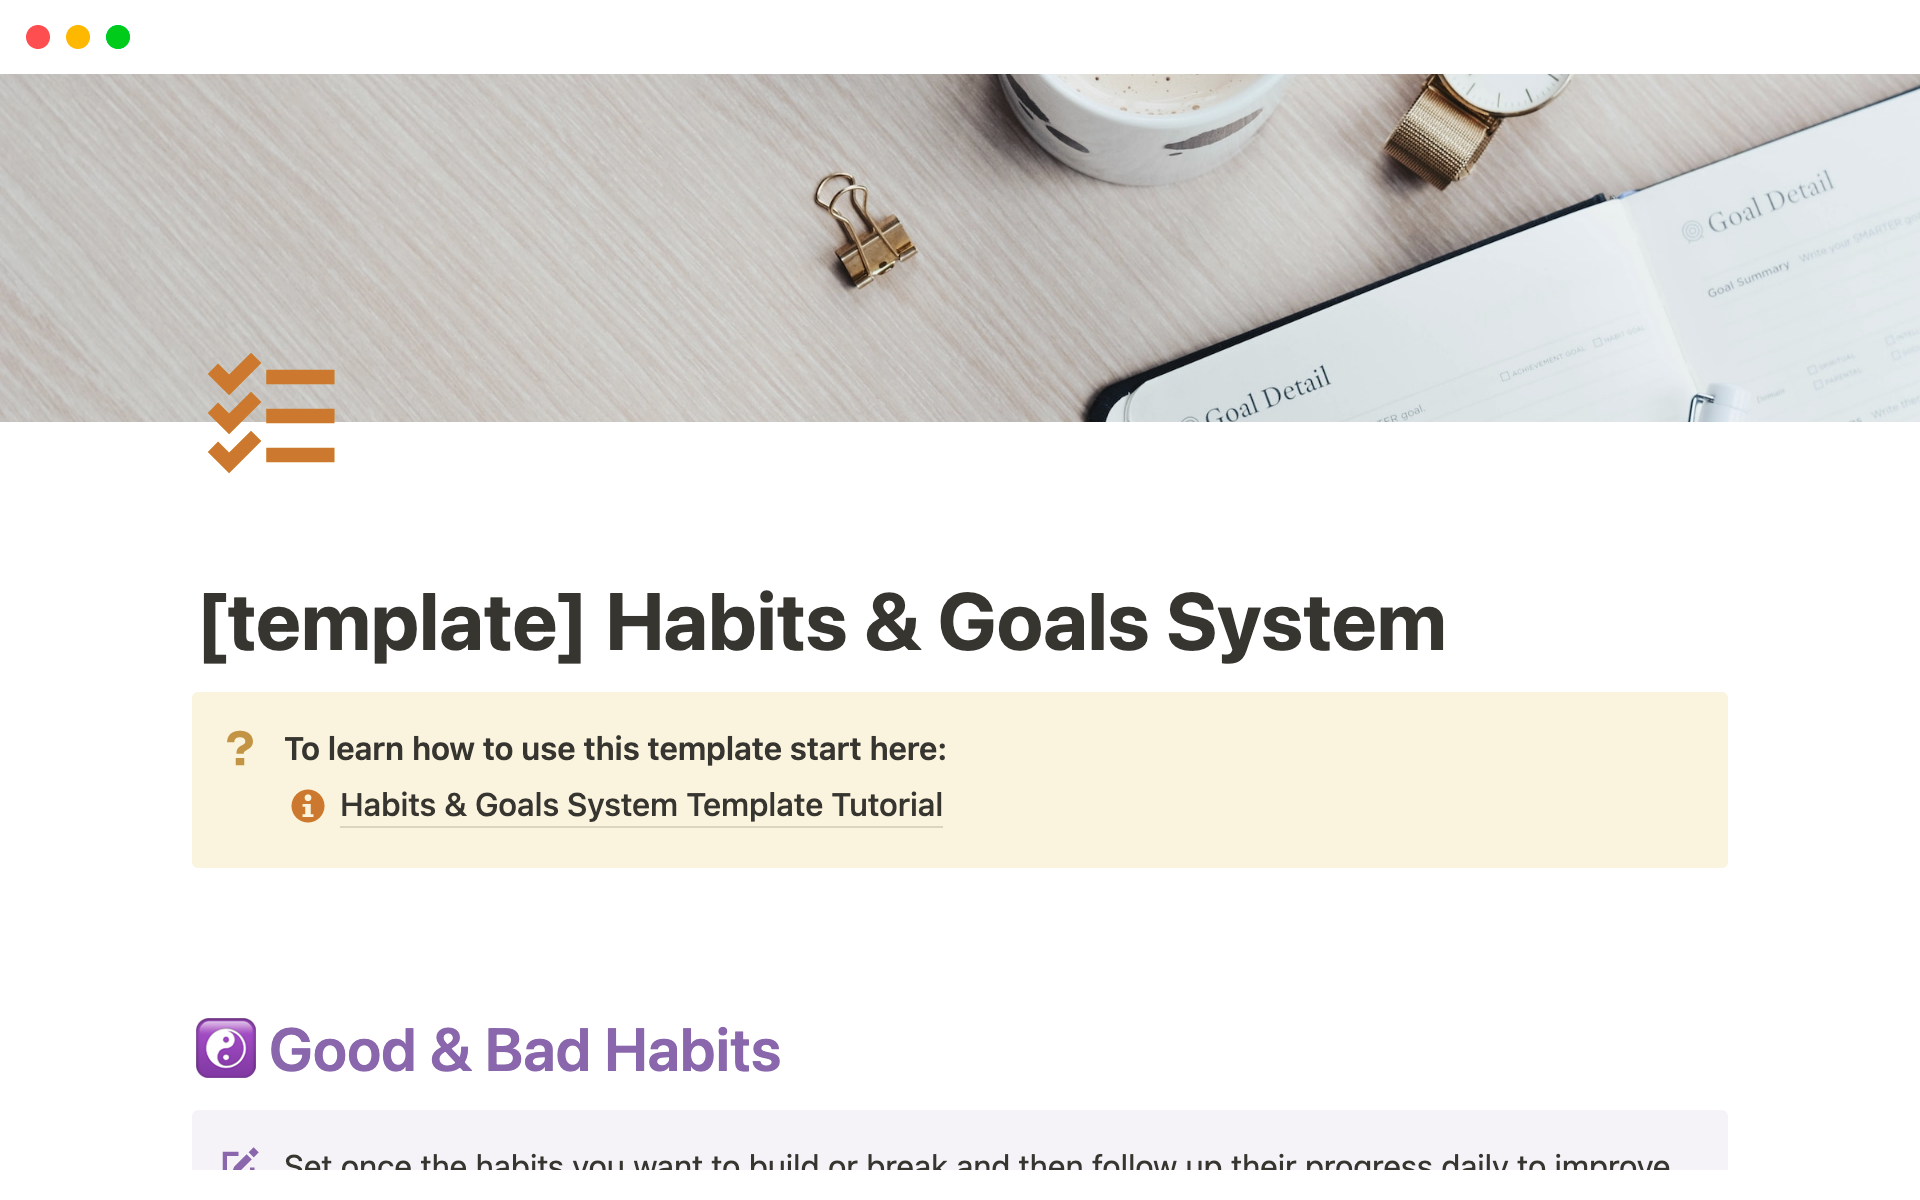 It helps you set and achieve your goals and track your progress toward building good habits and breaking bad ones.